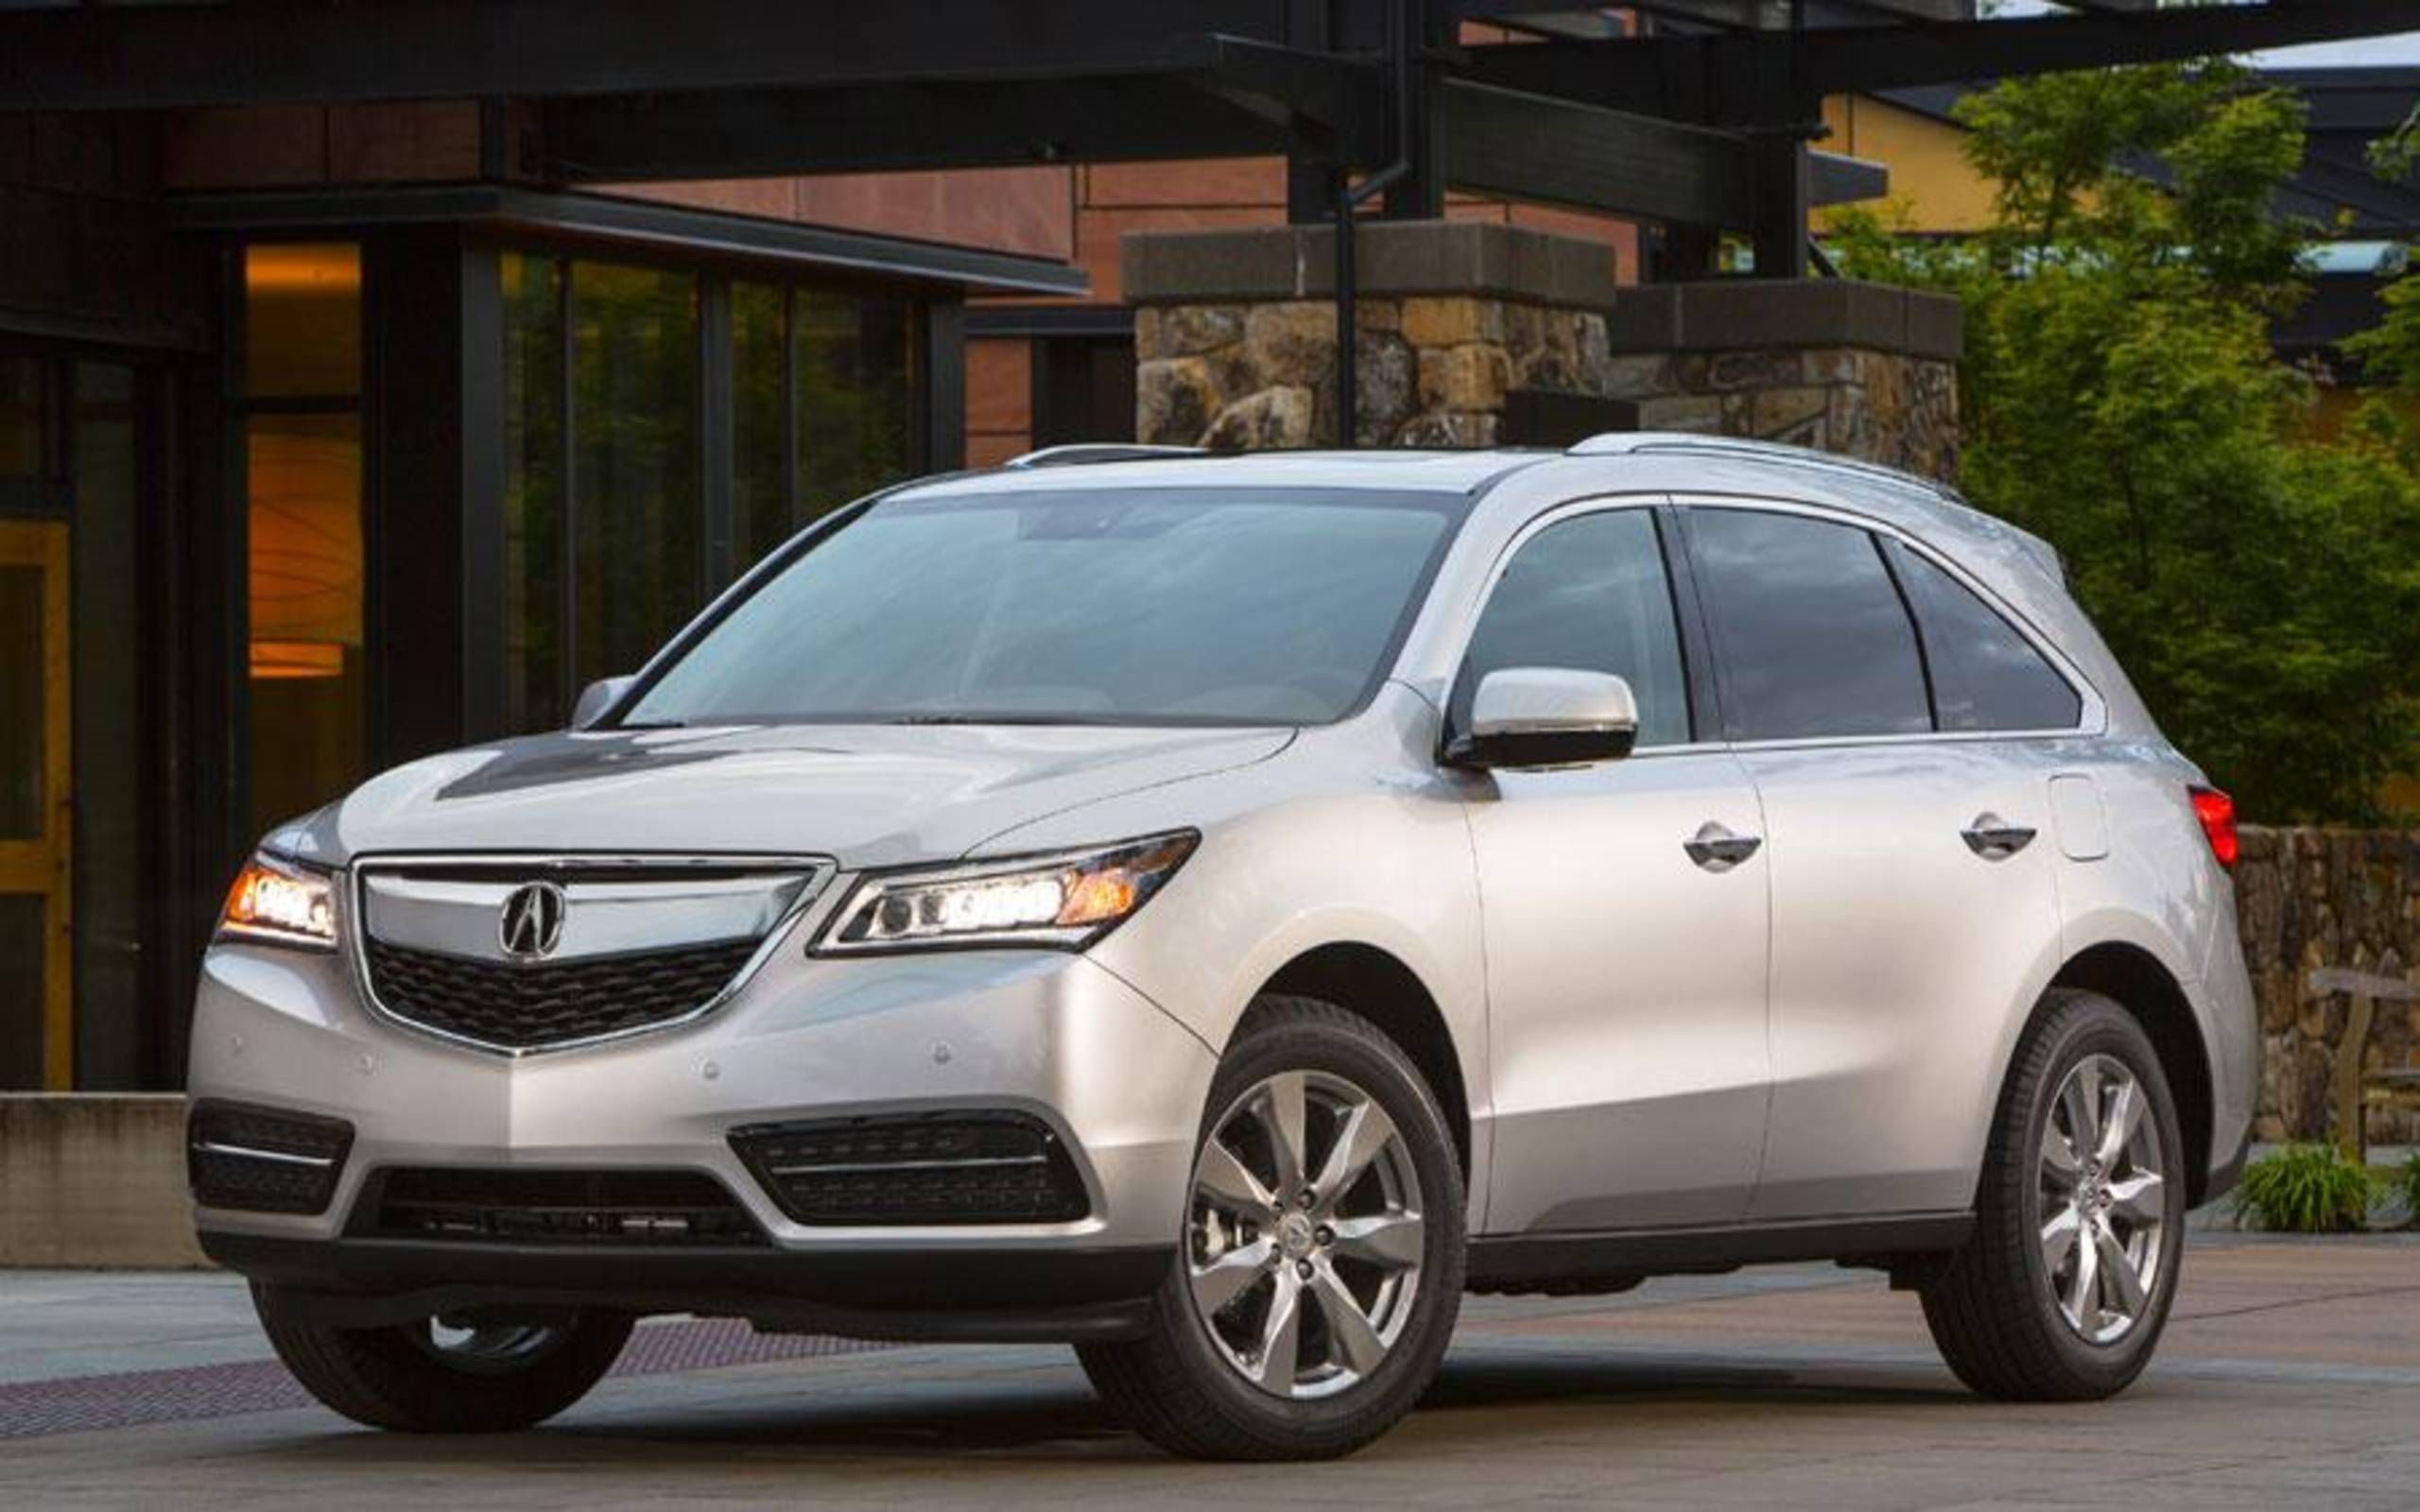 2014 Acura MDX SH-AWD review notes